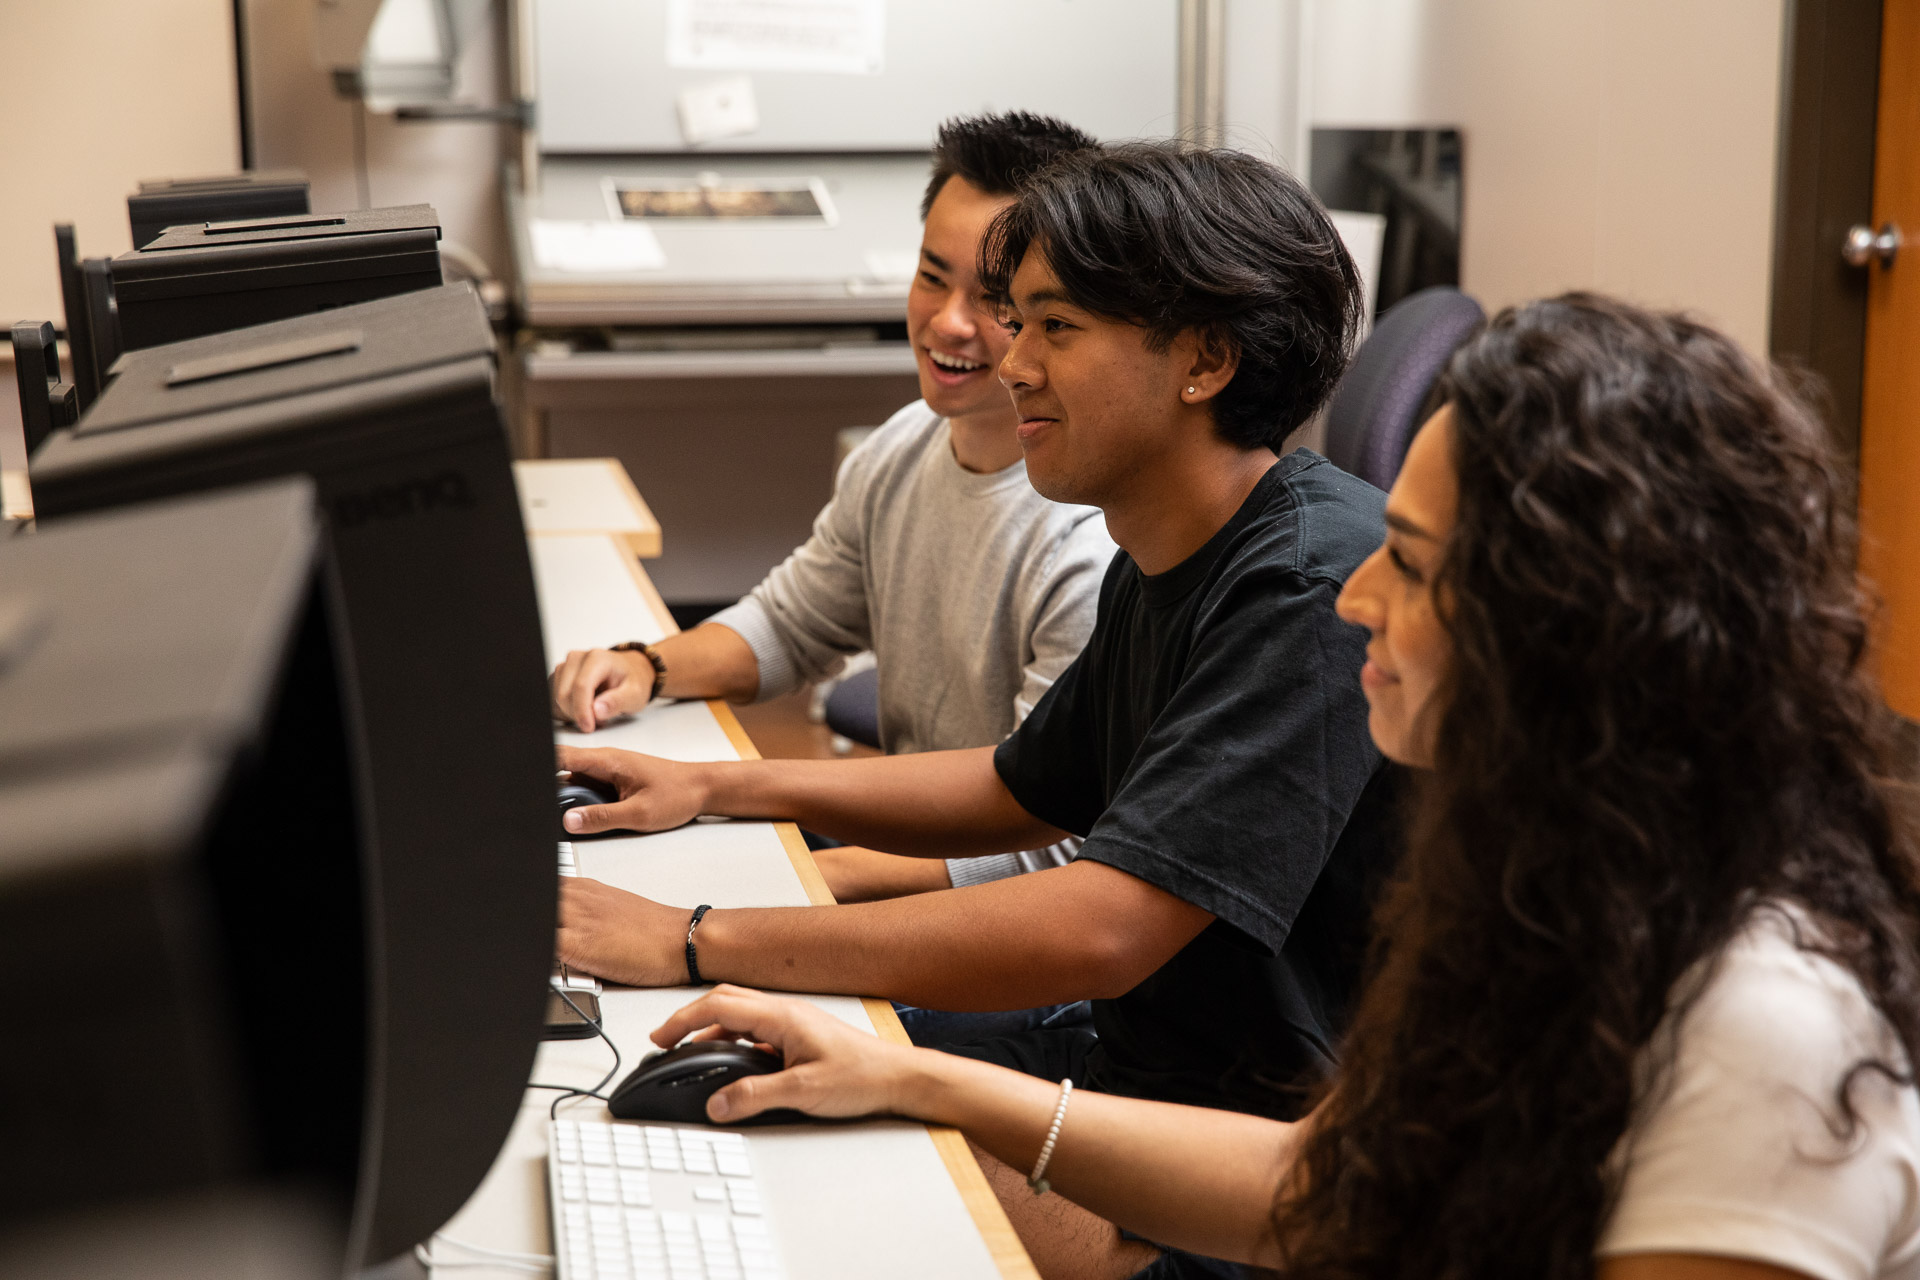 Students on computers in the lab